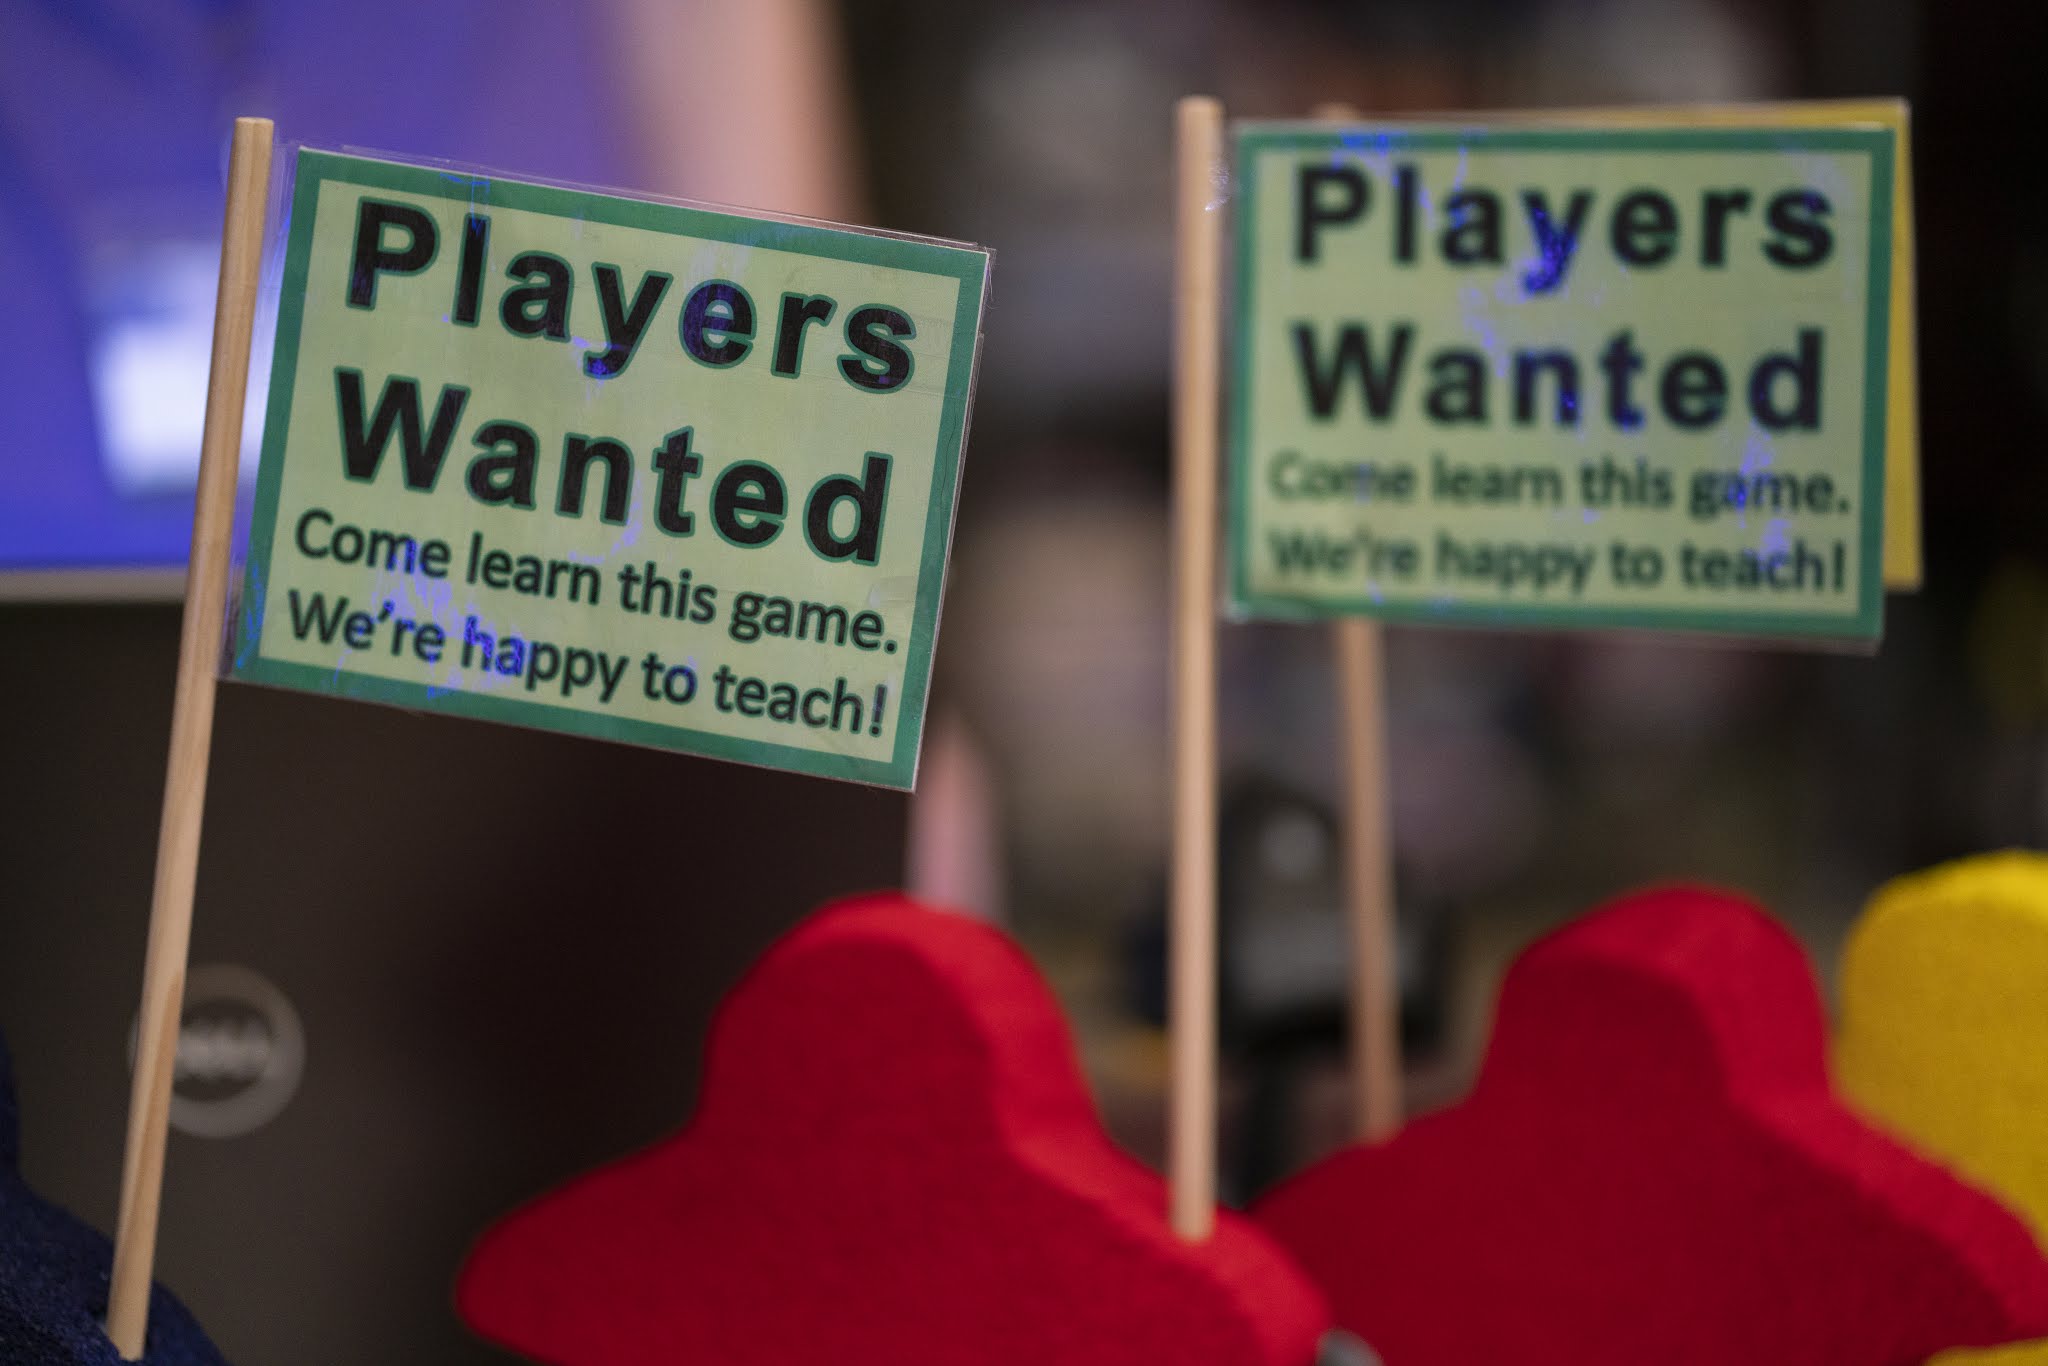 Meeple-shaped sign holders. Sign Reads "Players Wanted - Come Learn This Game. We're Happy to Teach!"